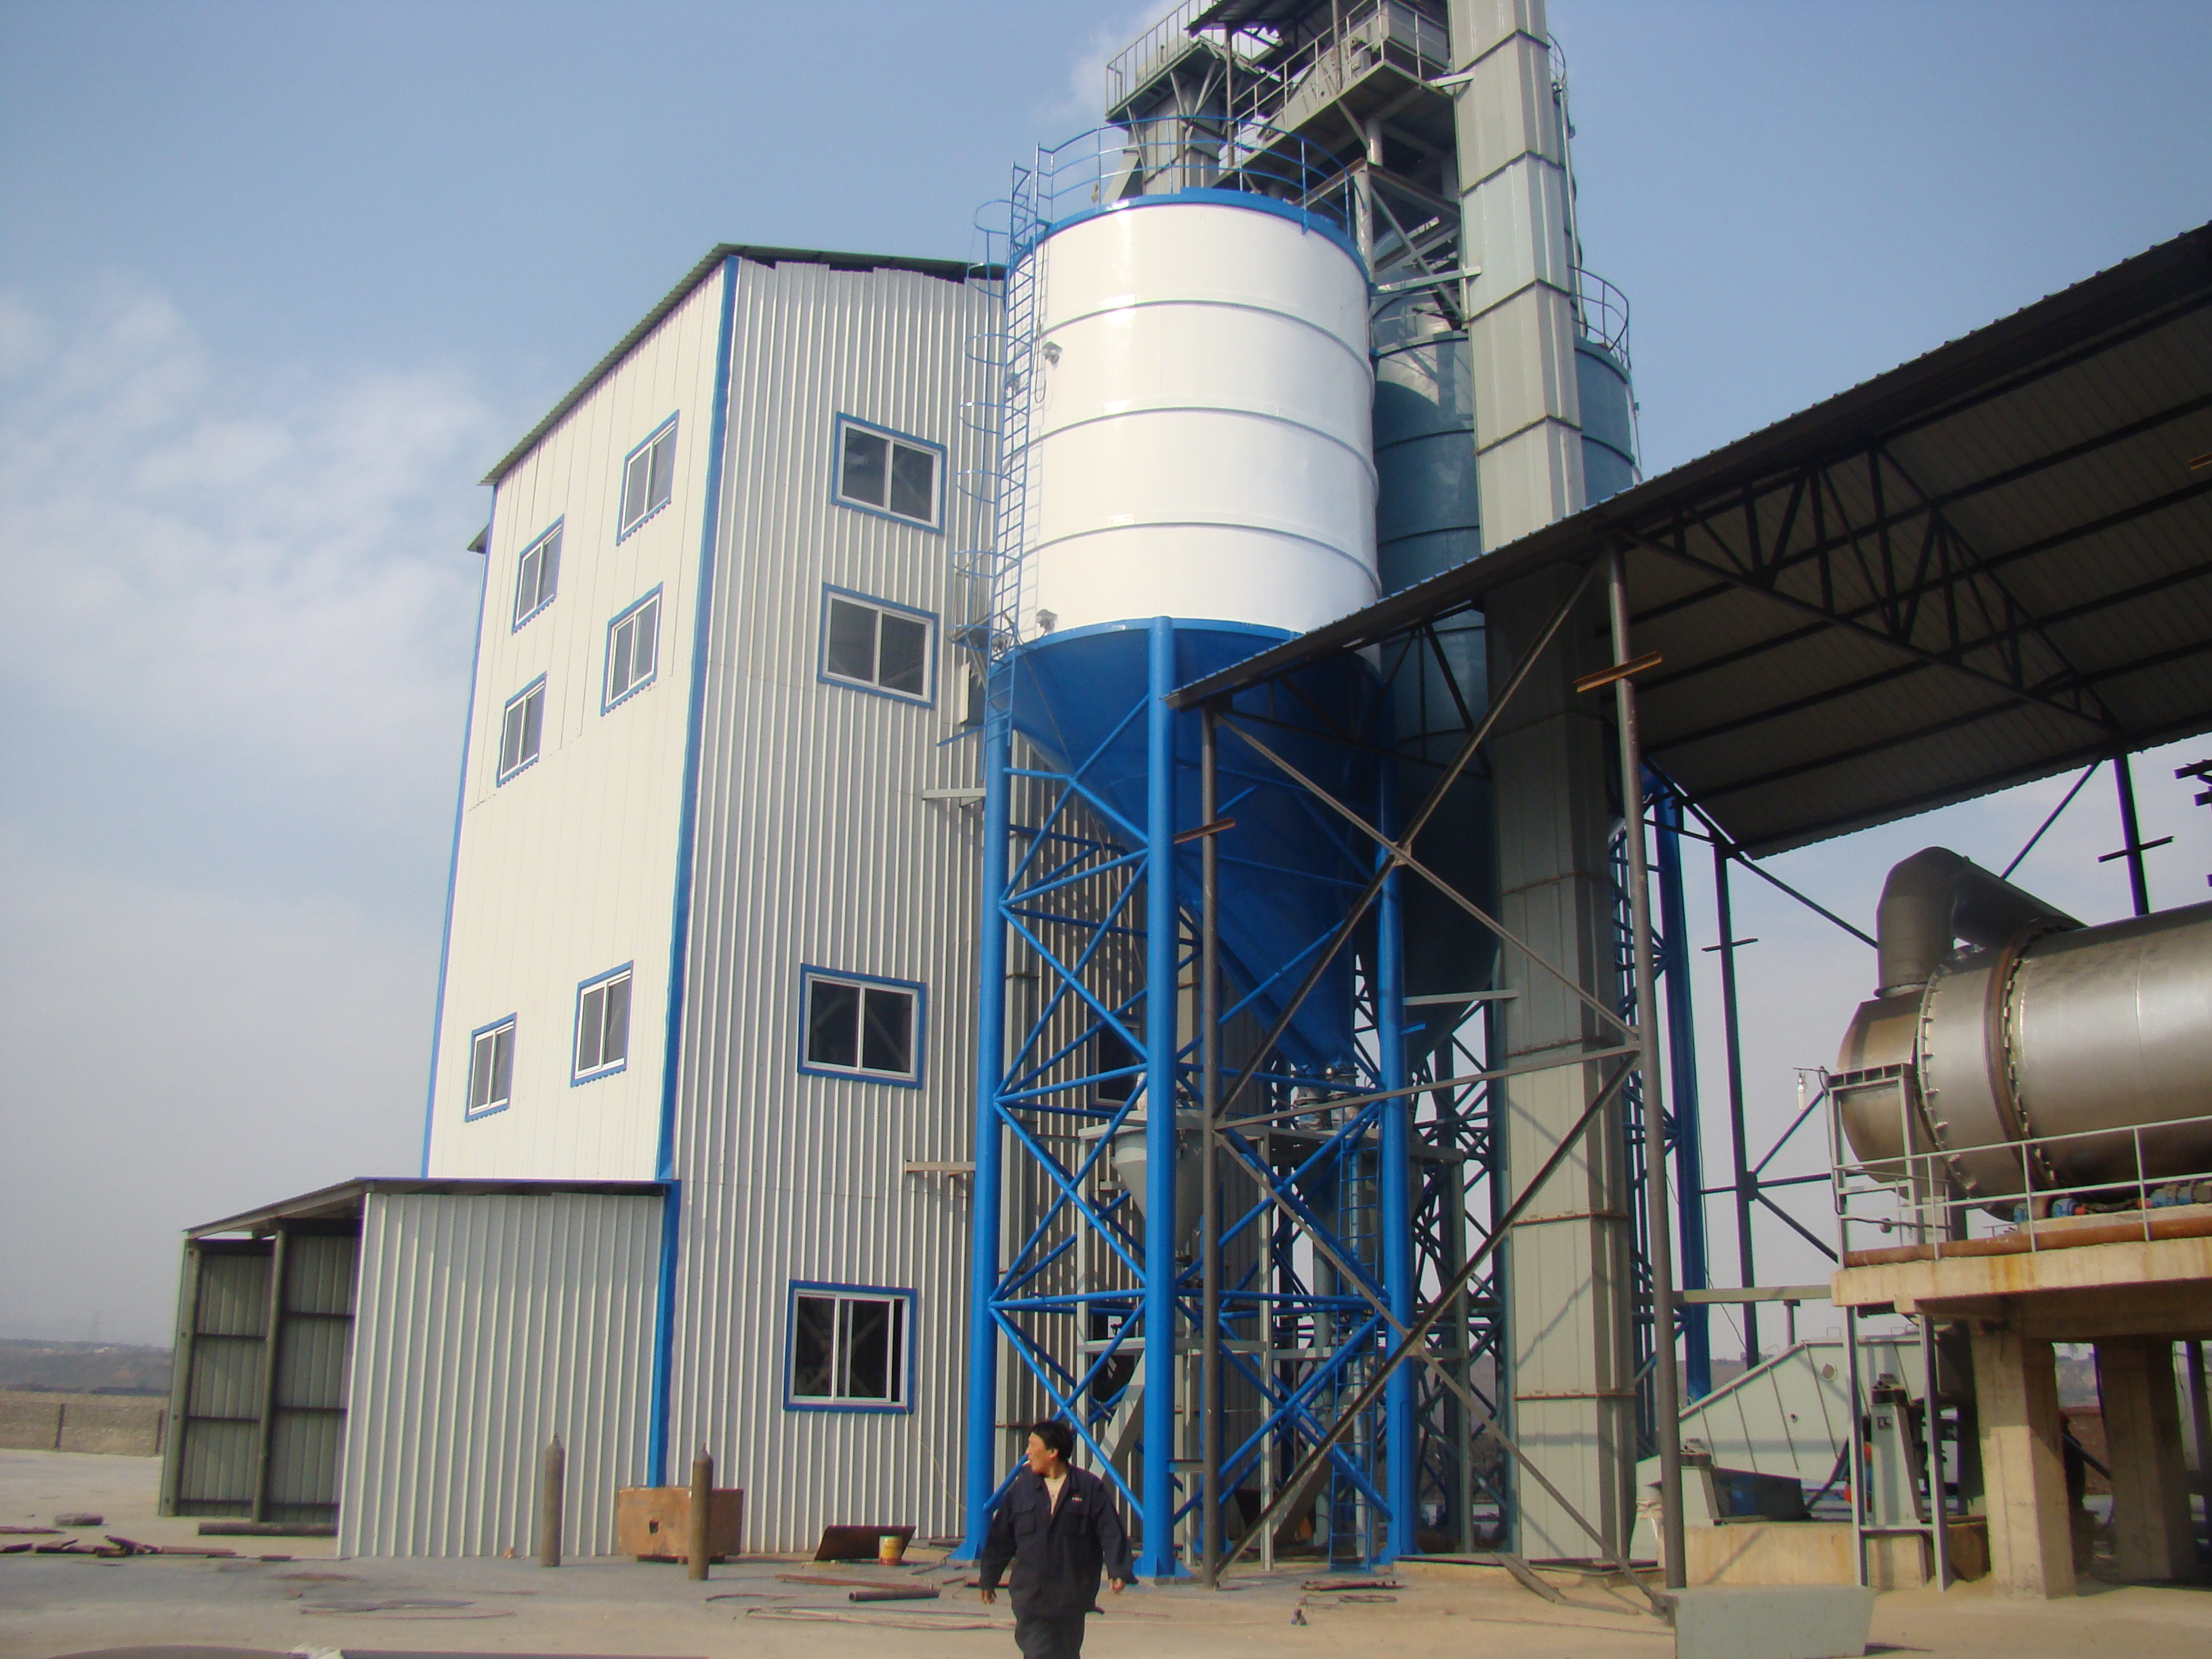 dry mortar production line